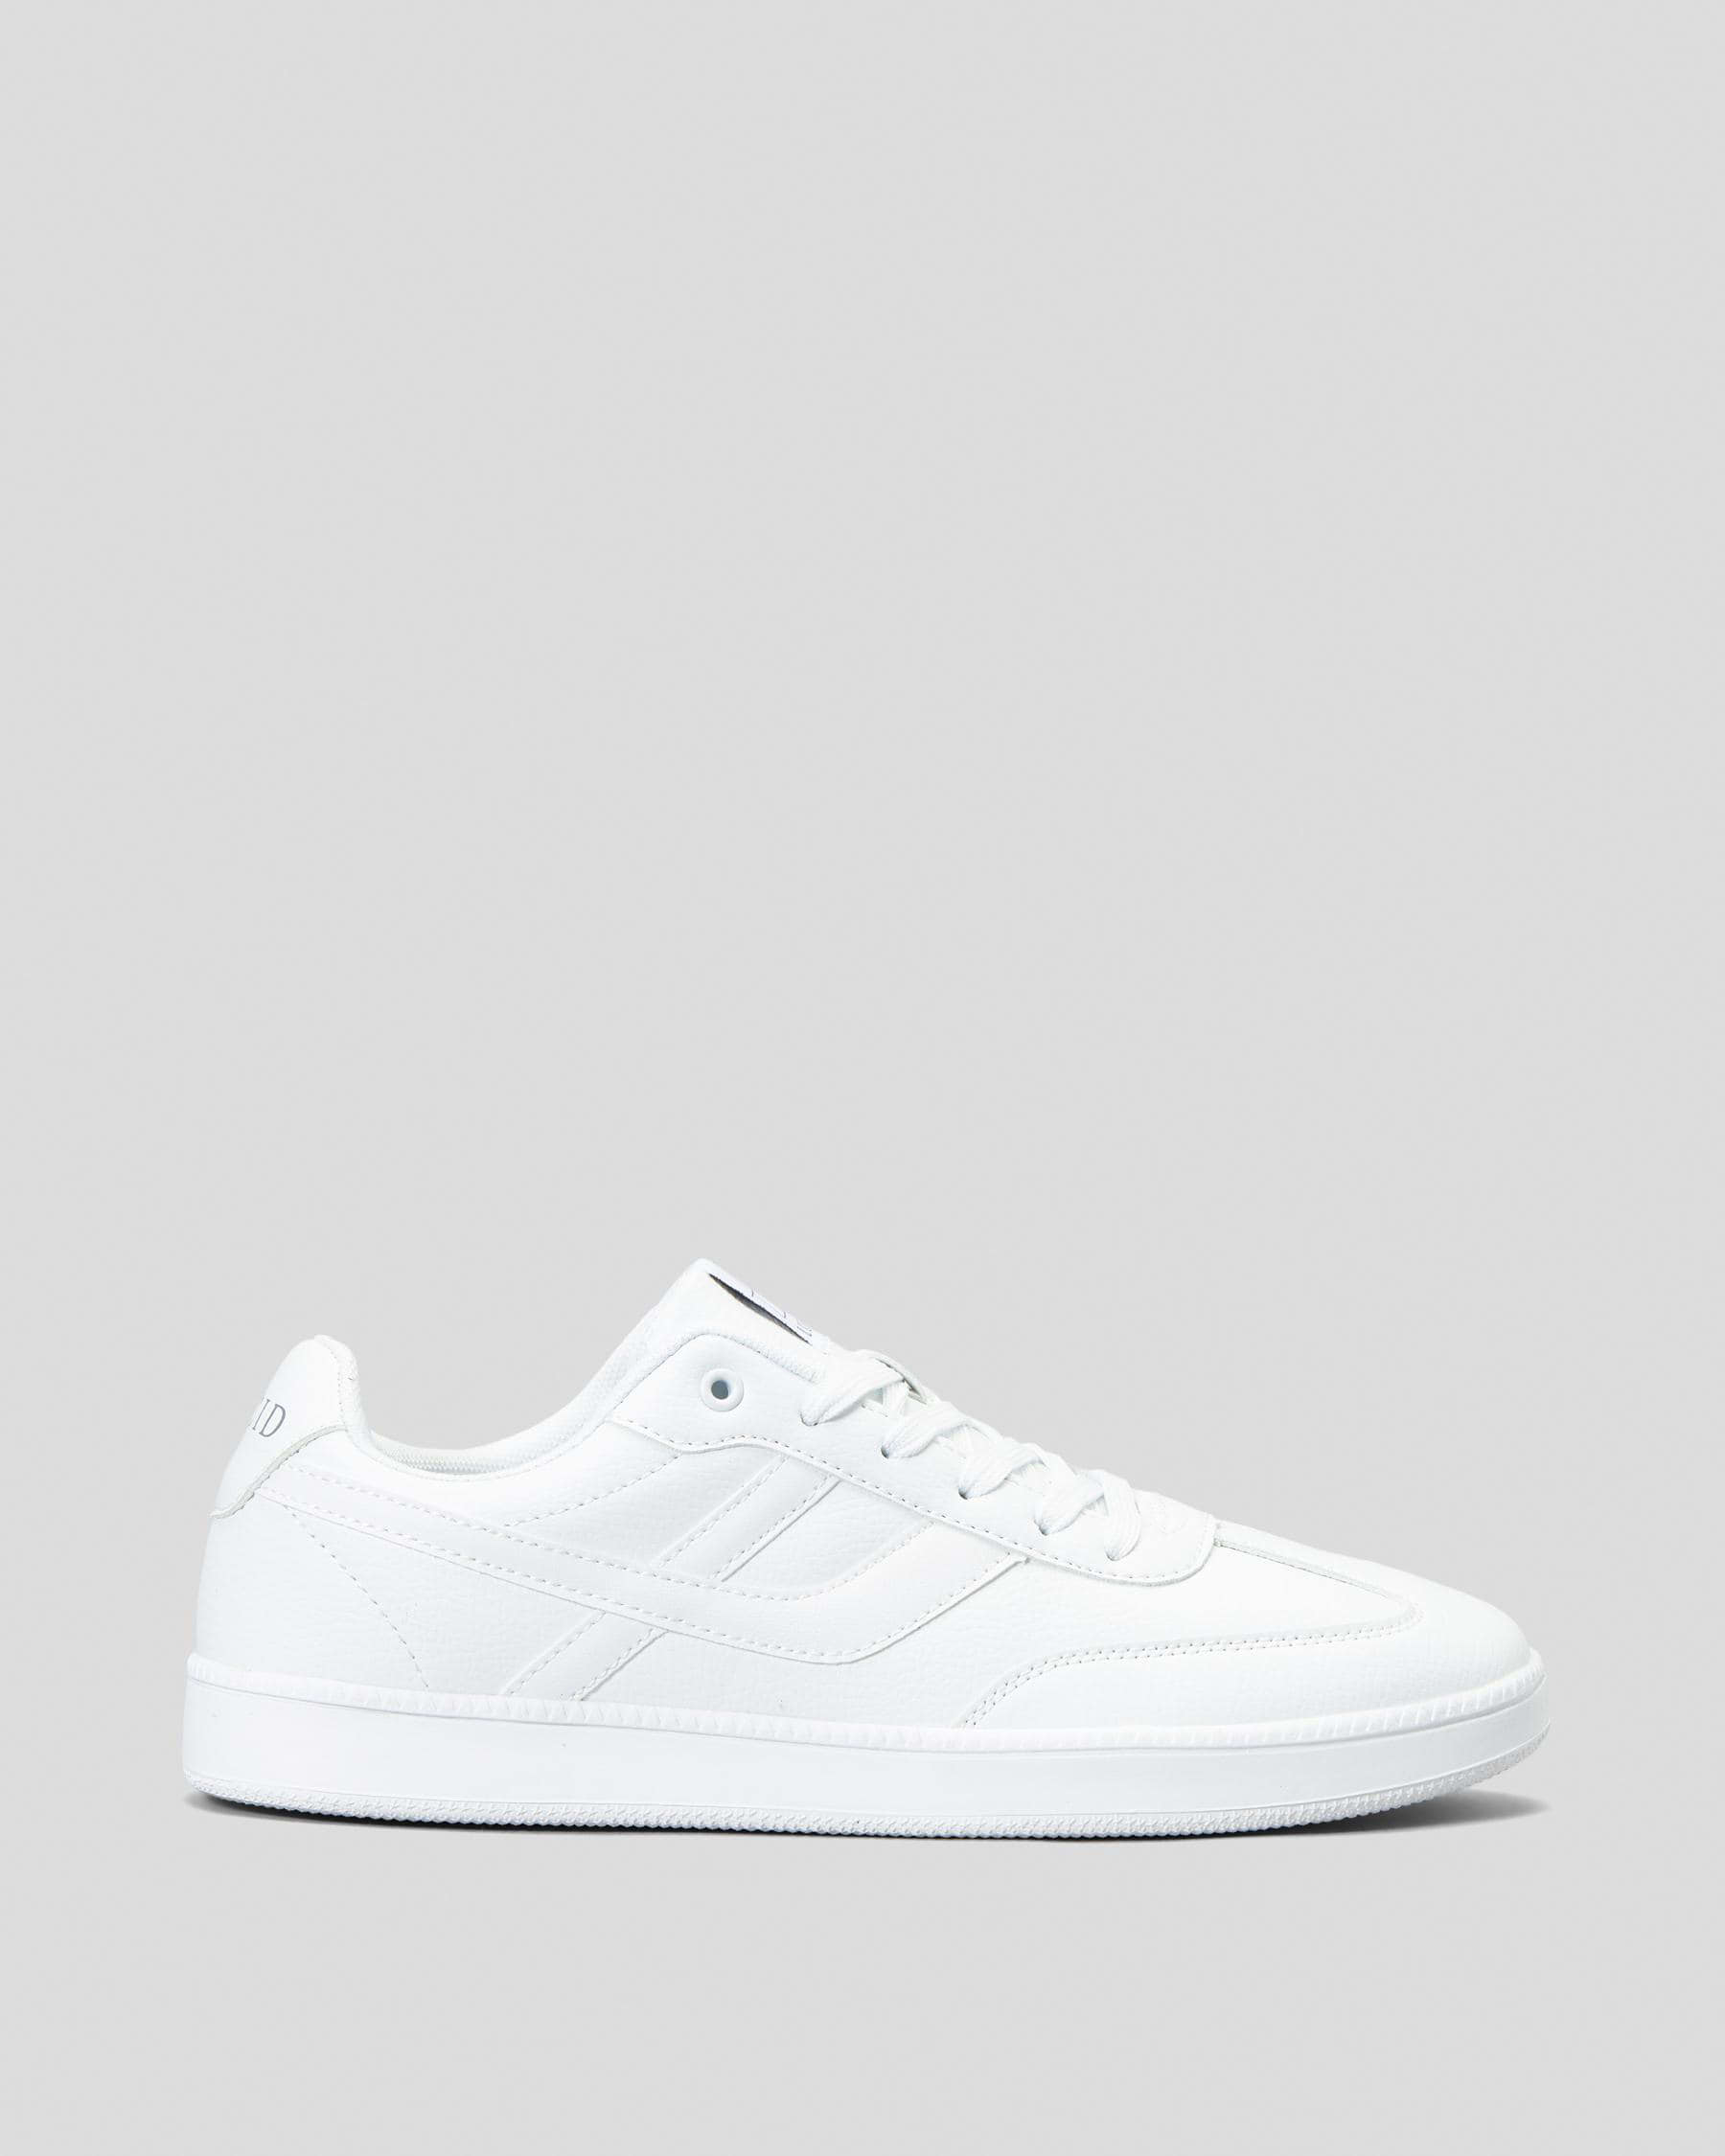 Shop Lucid Salvador Shoes In White/white - Fast Shipping & Easy Returns ...